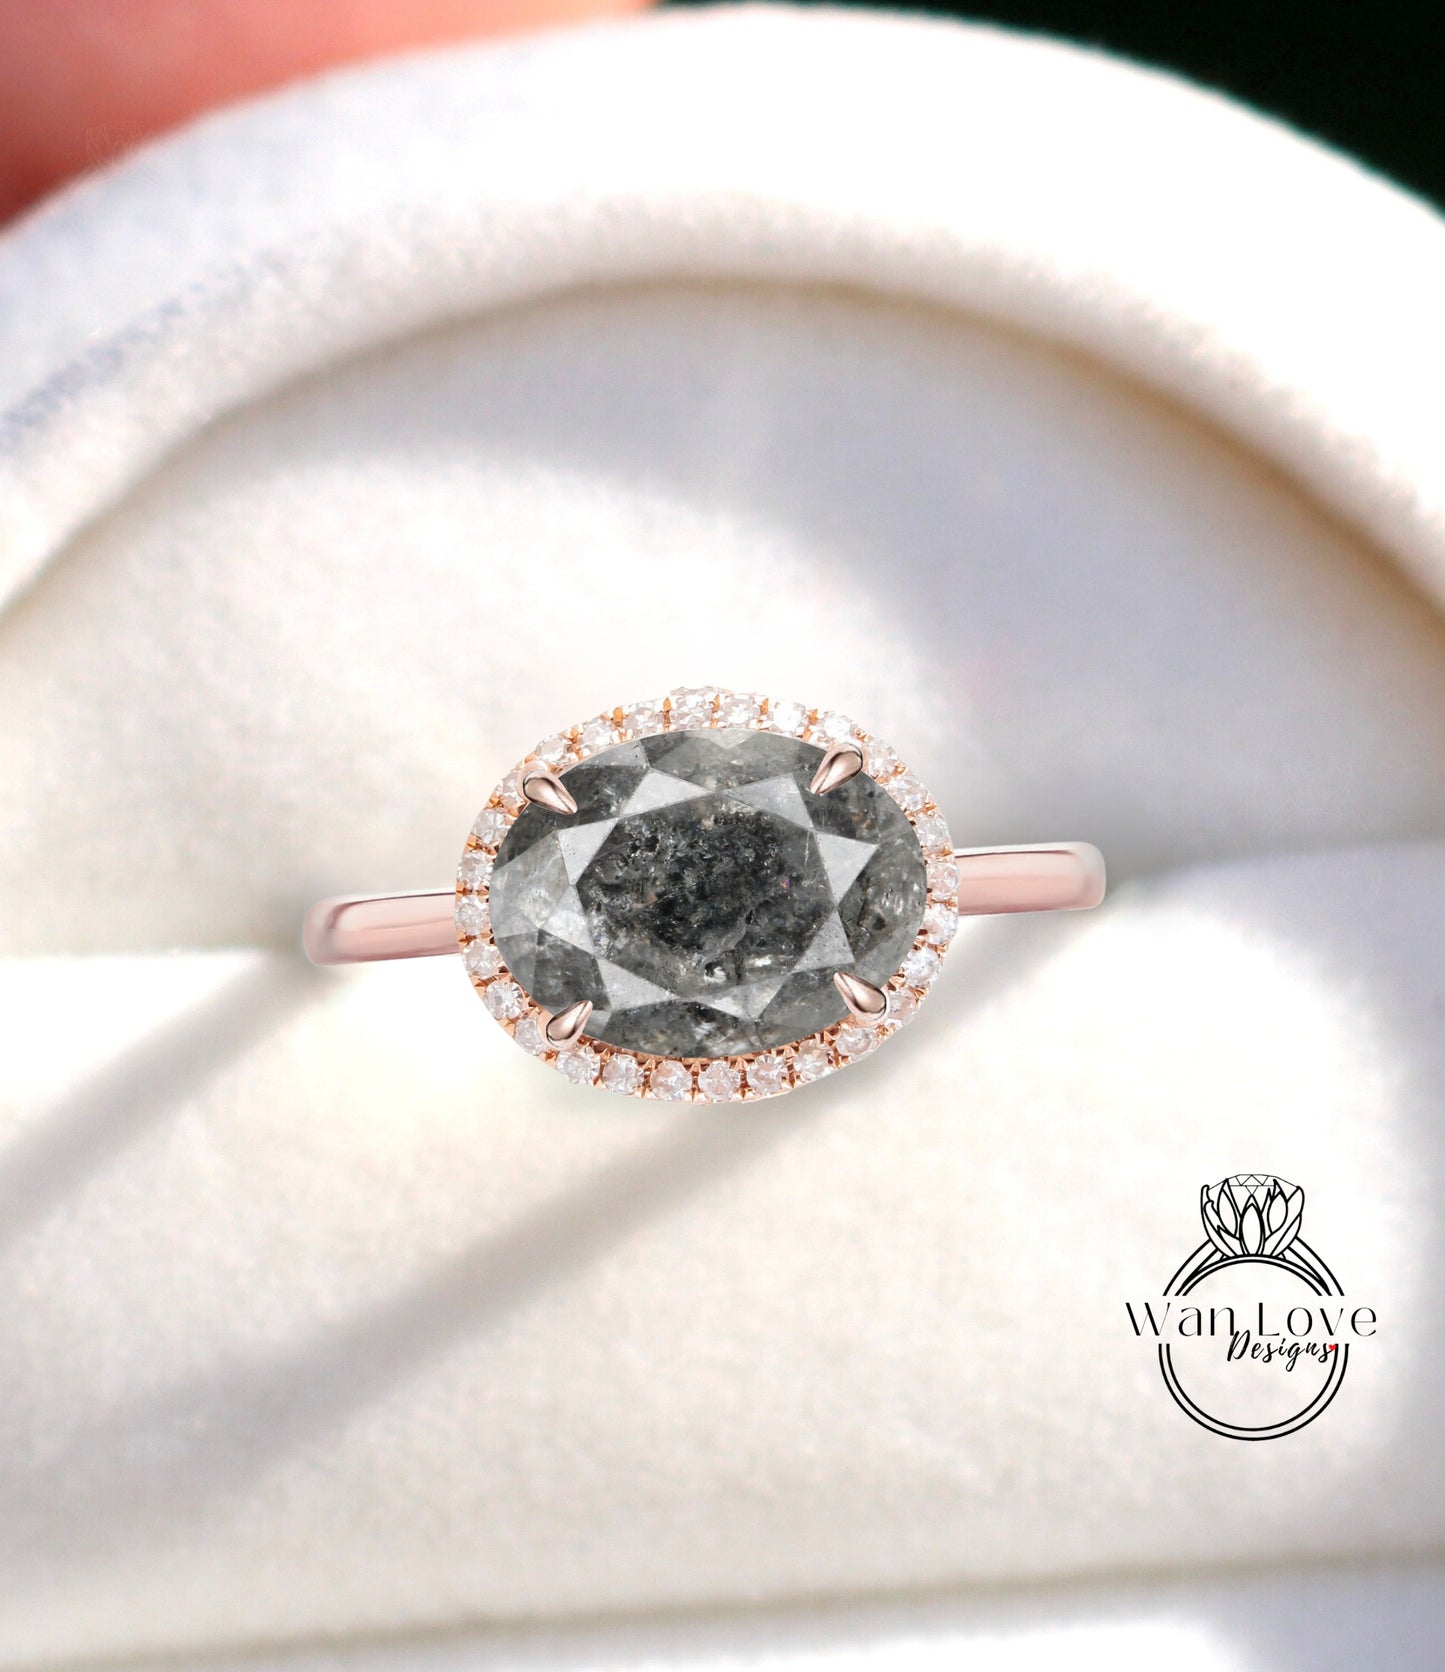 Salt & Pepper Diamond East West Oval Halo plain band Engagement Ring Antique gold band ring unique vintage diamond Anniversary promise ring